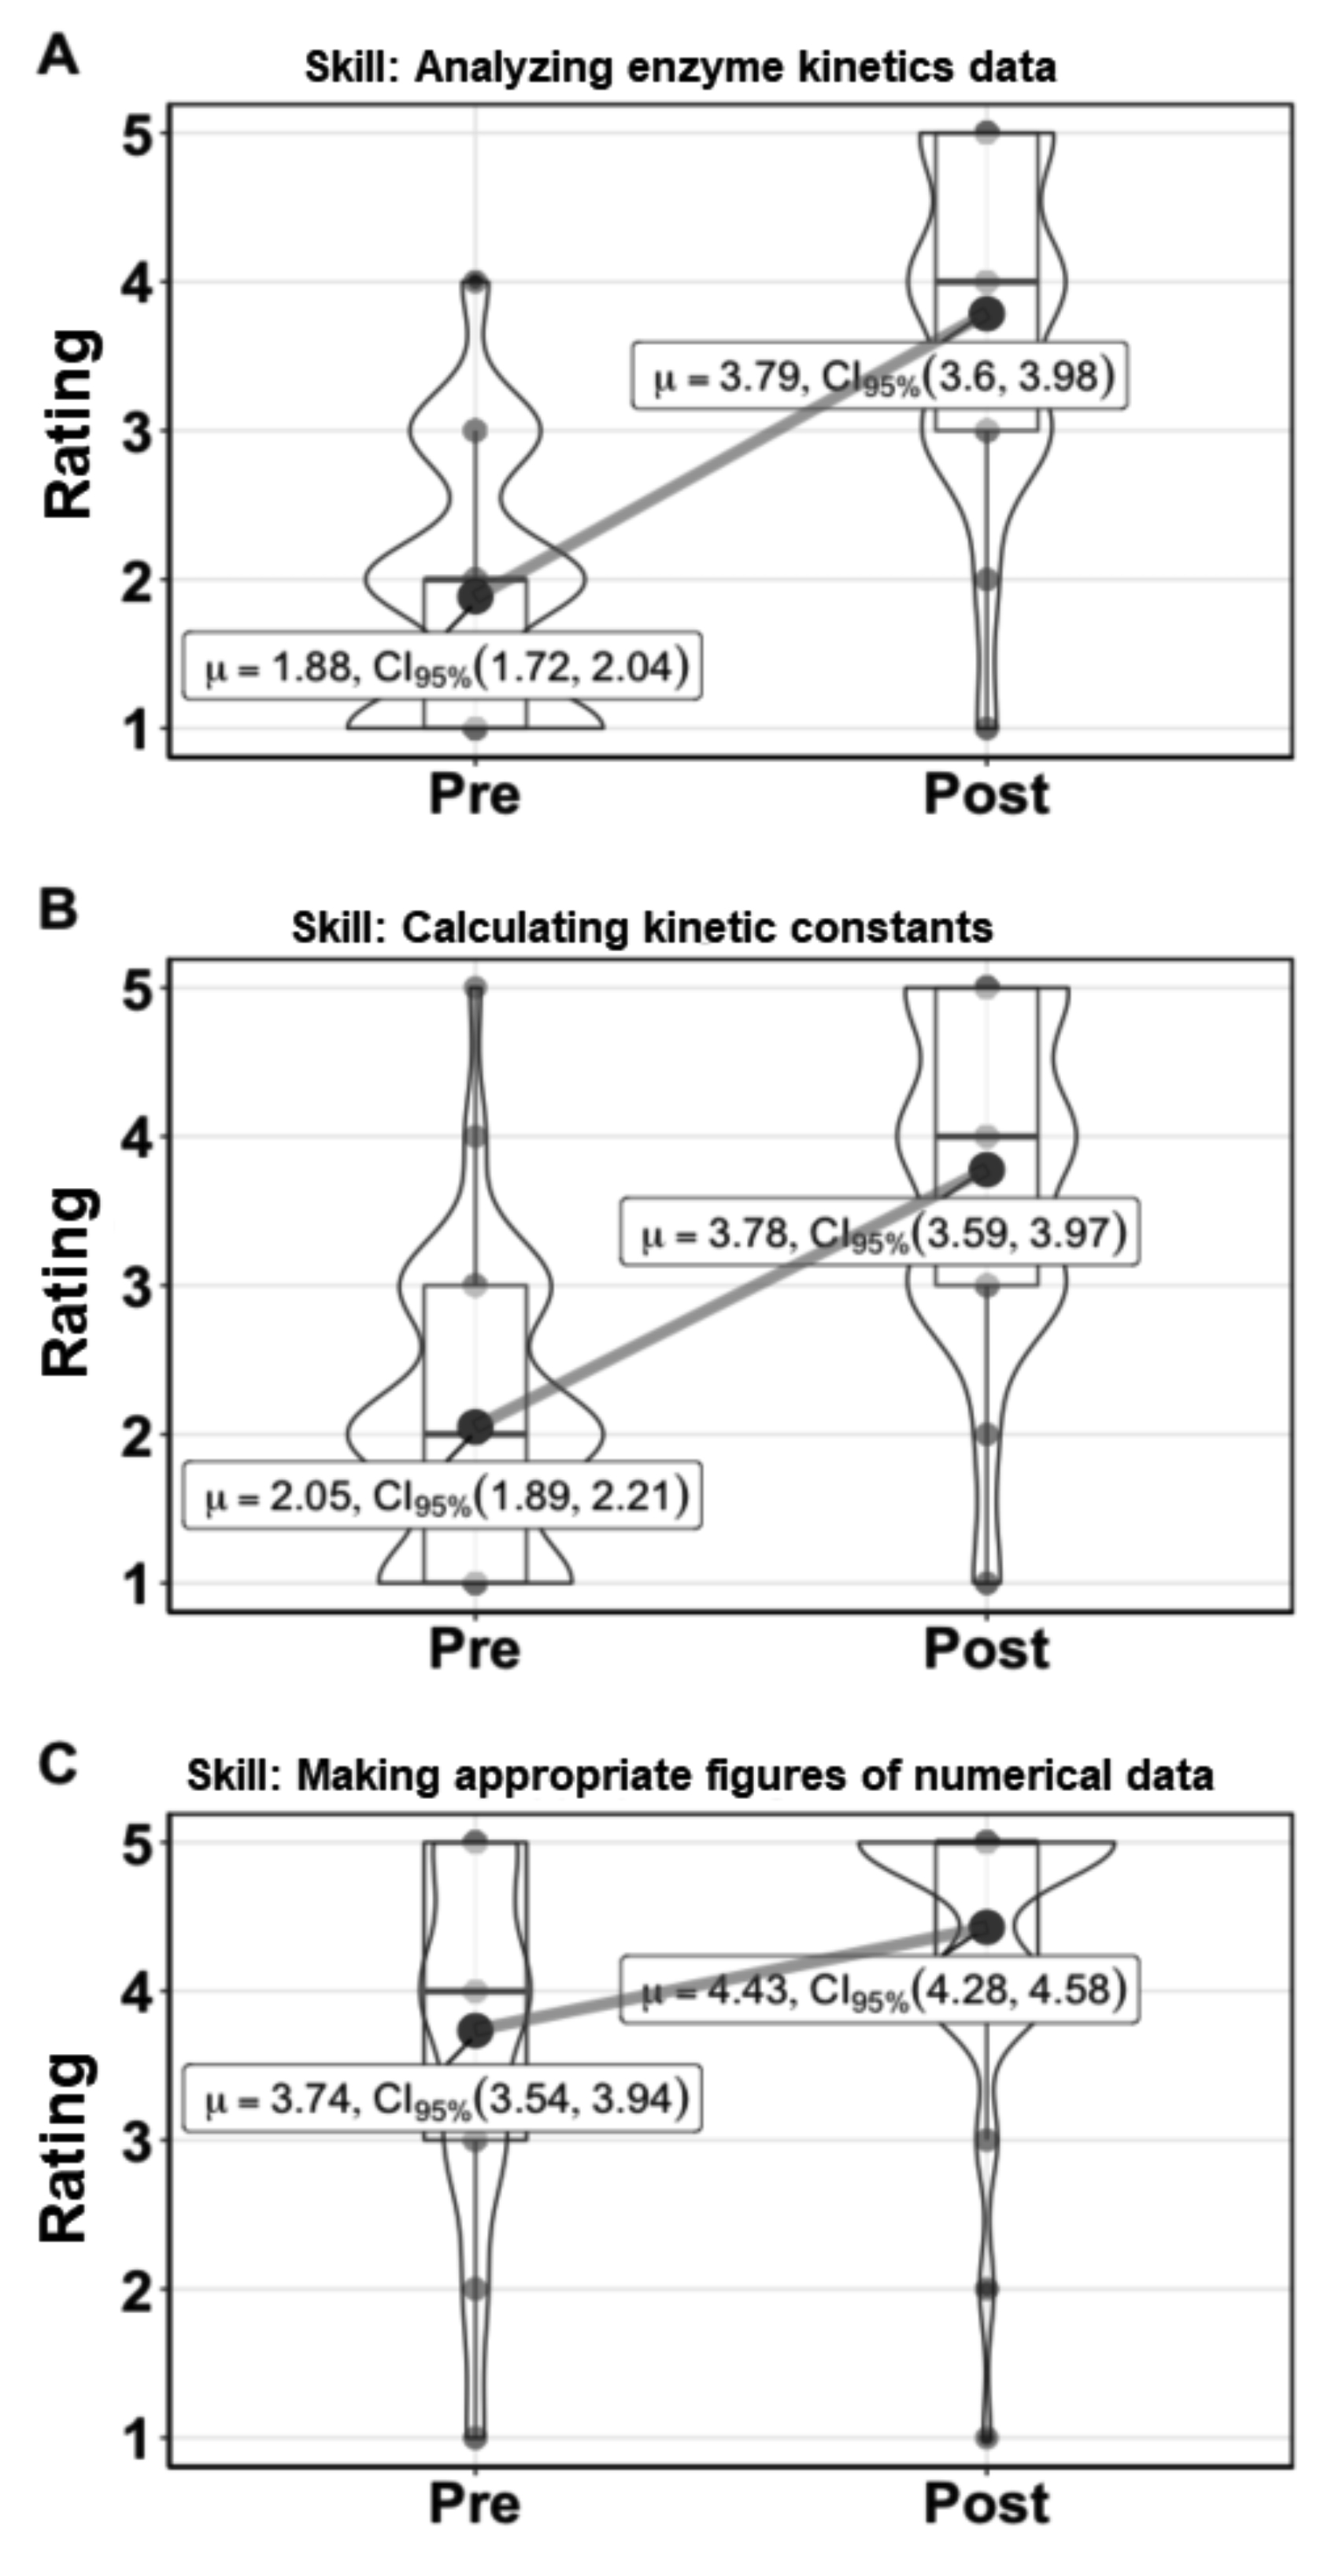 Figure 3. Kinetics lessons increase student confidence in analyzing and communicating enzyme kinetics data. 